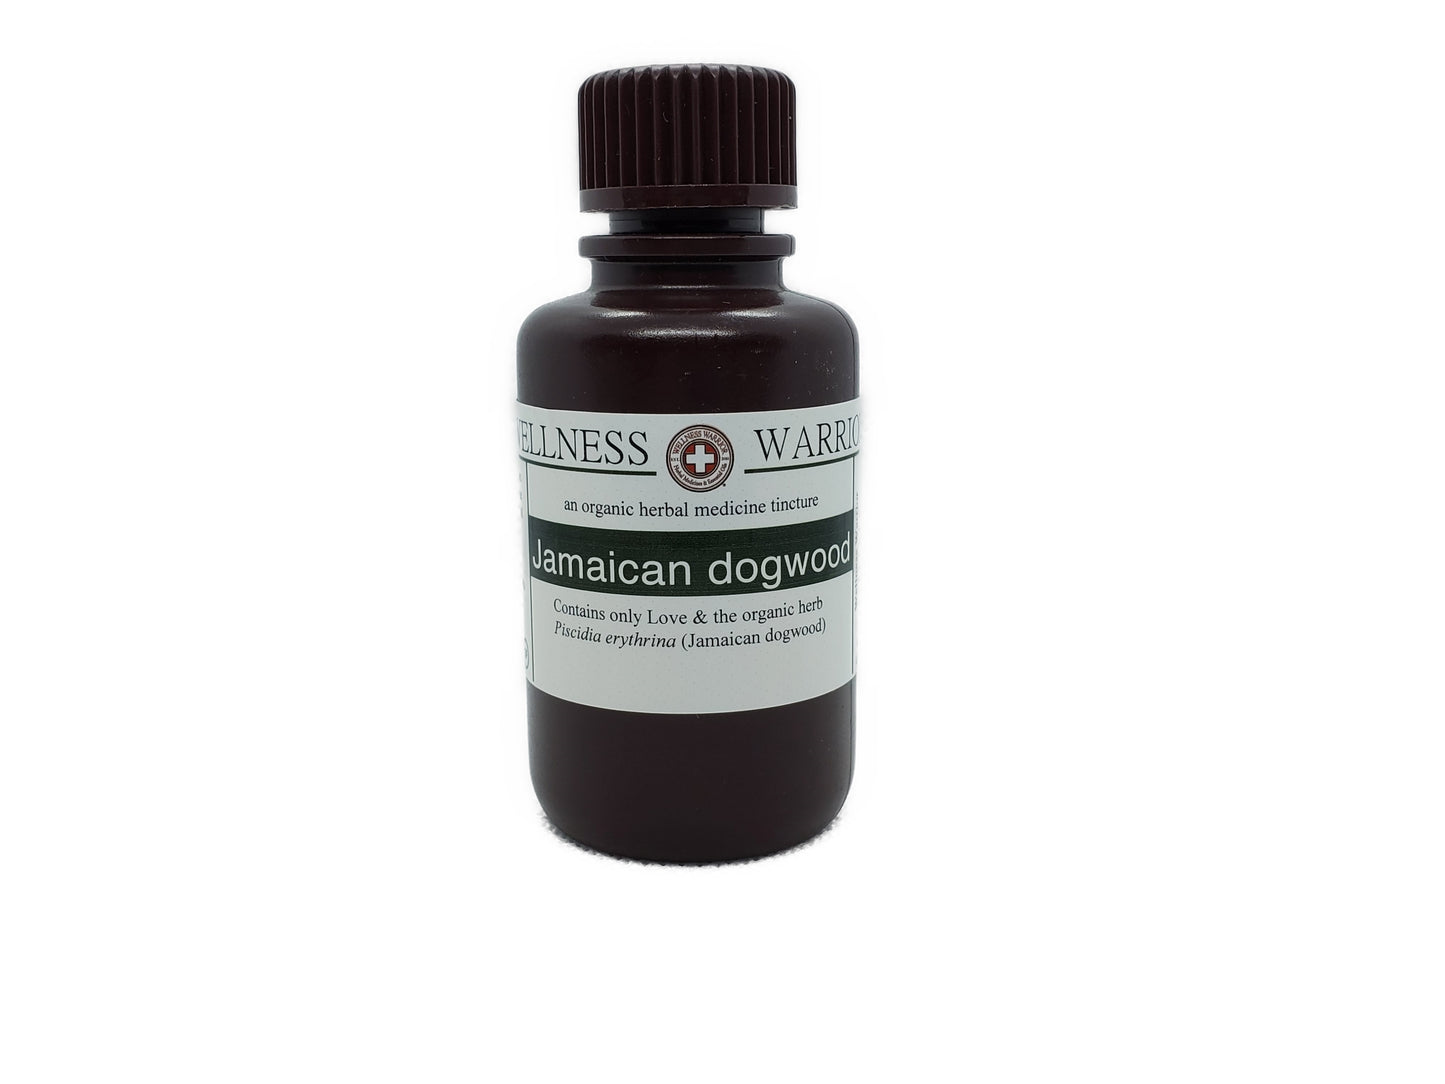 Jamaican Dogwood Tincture - First Aid for Pain